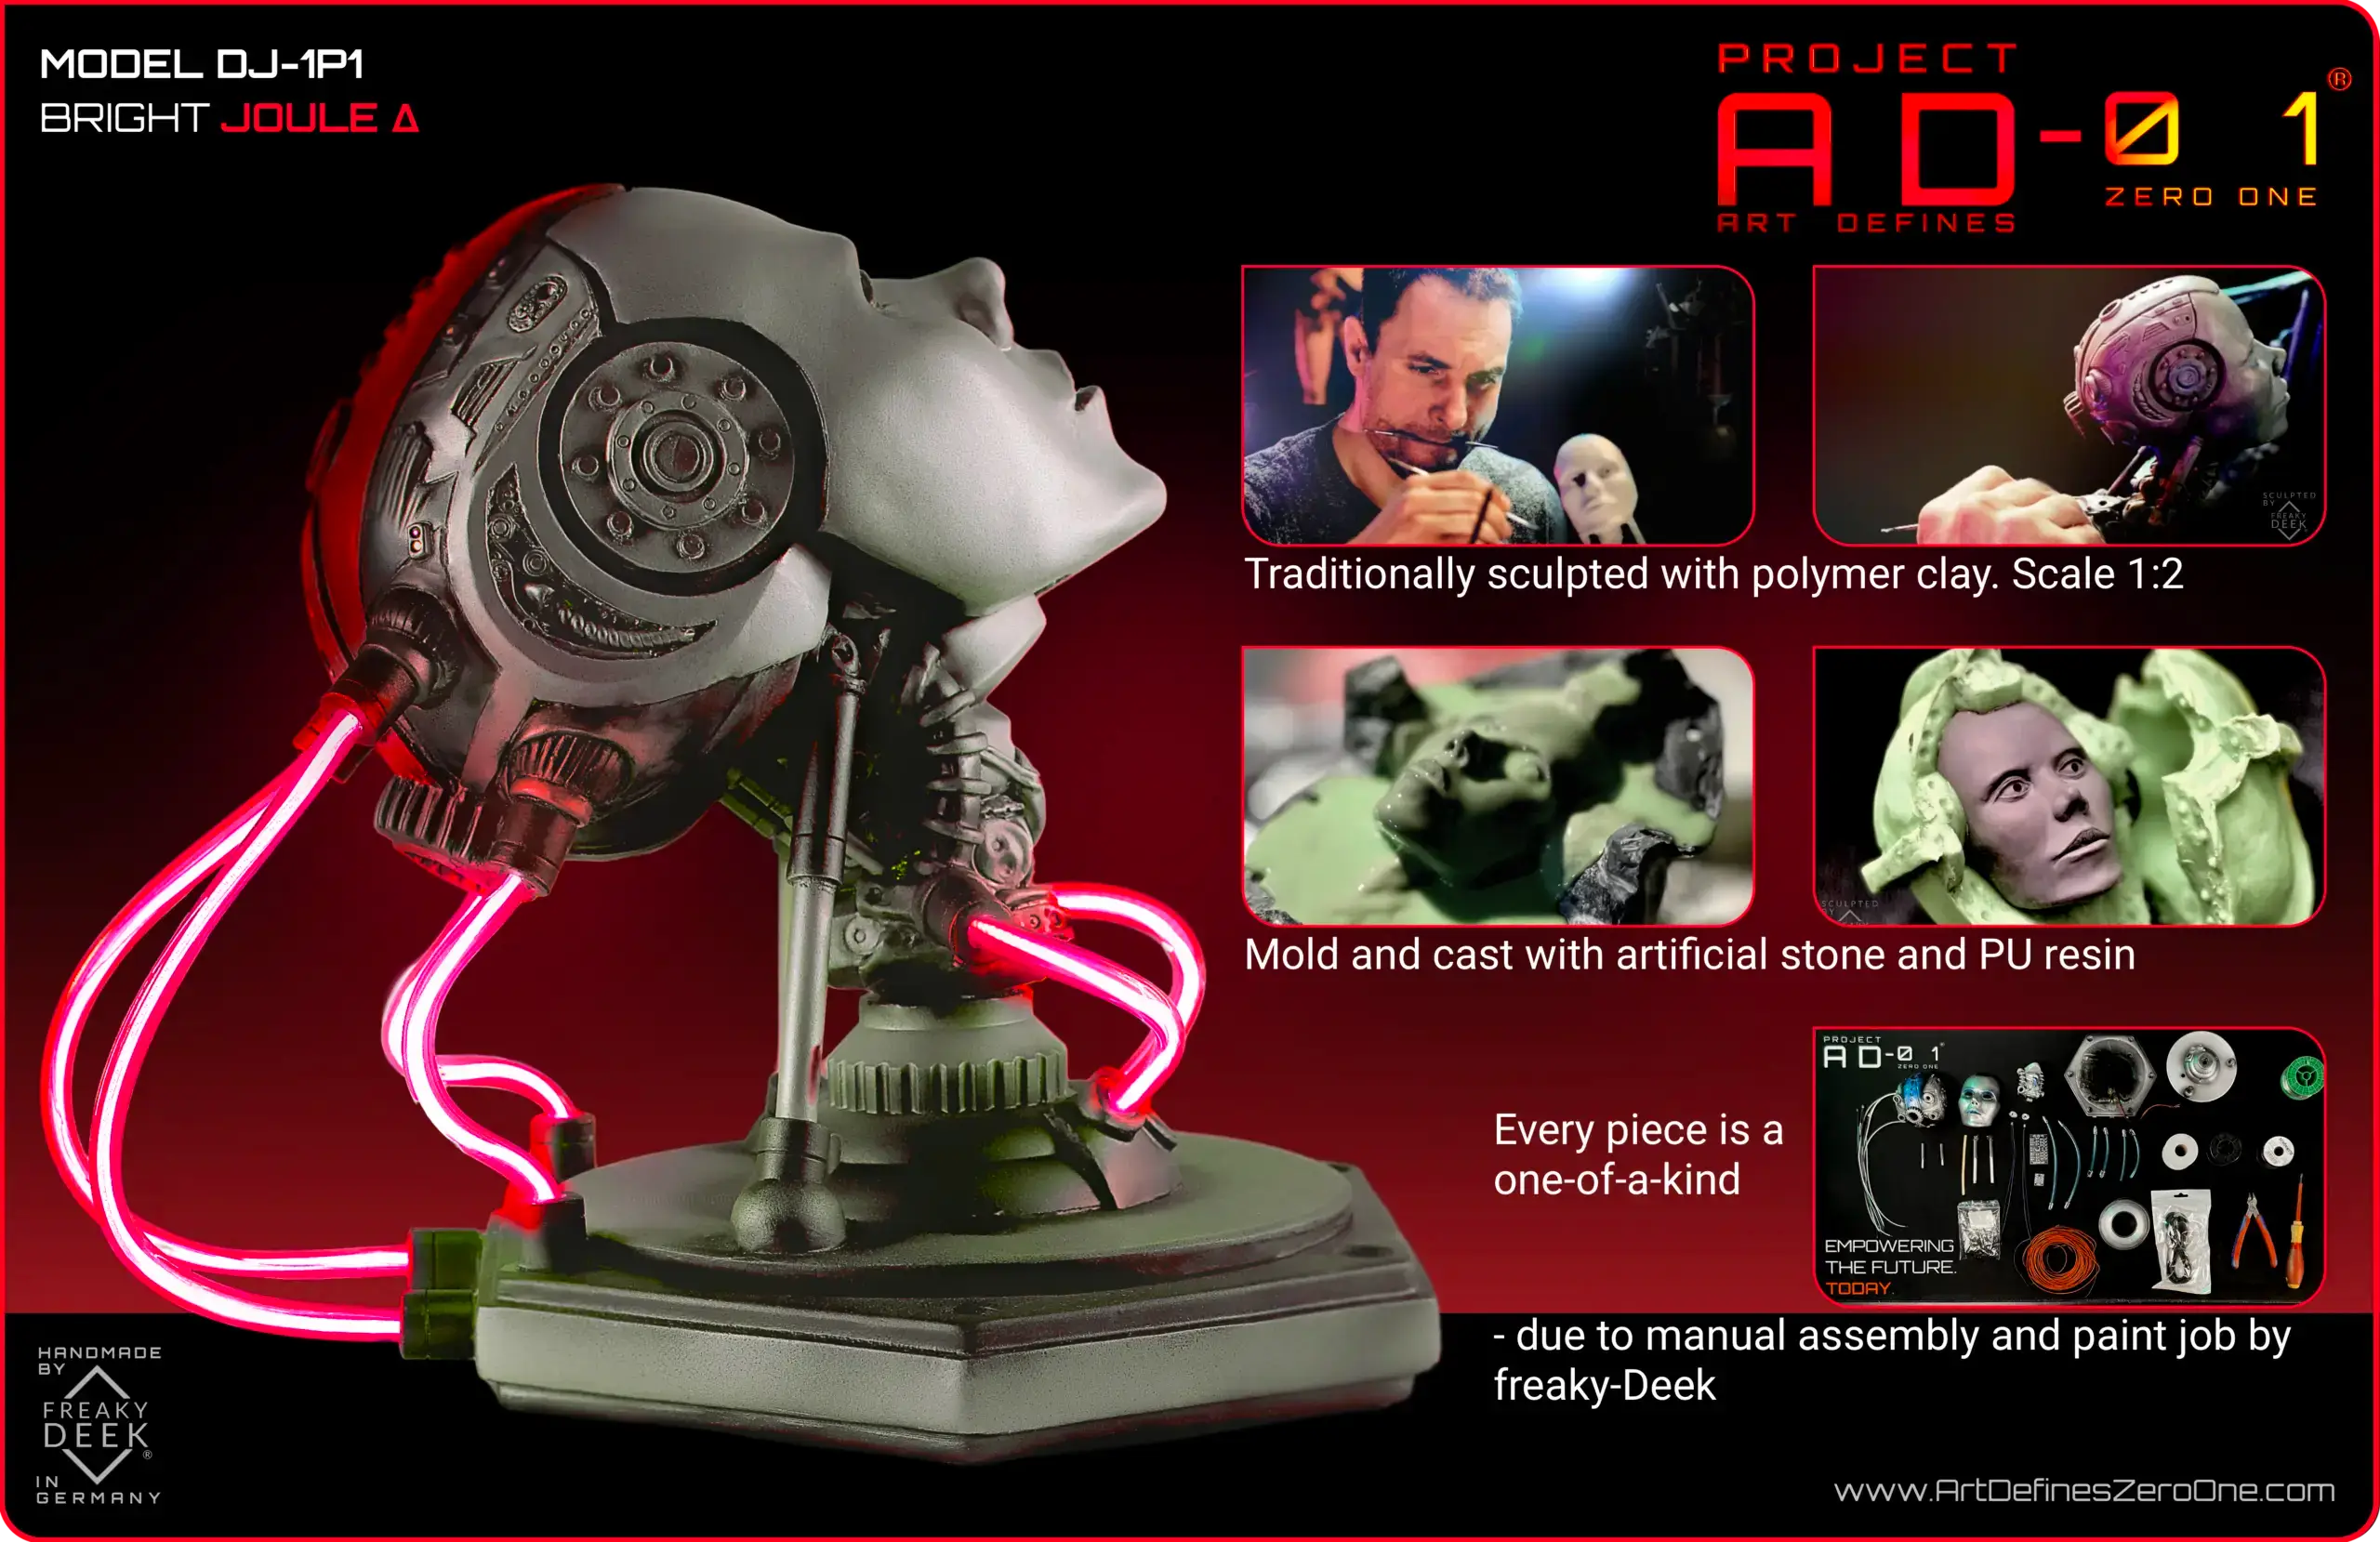 Project AD-01 DJ-1P1 handmade android sculpture bright Joule with red LED energy tubes, product details: traditionally sculpted with polymer clay, scale 1:2, mold and cast by hand with polystone and PU resin, handpainted and assembled